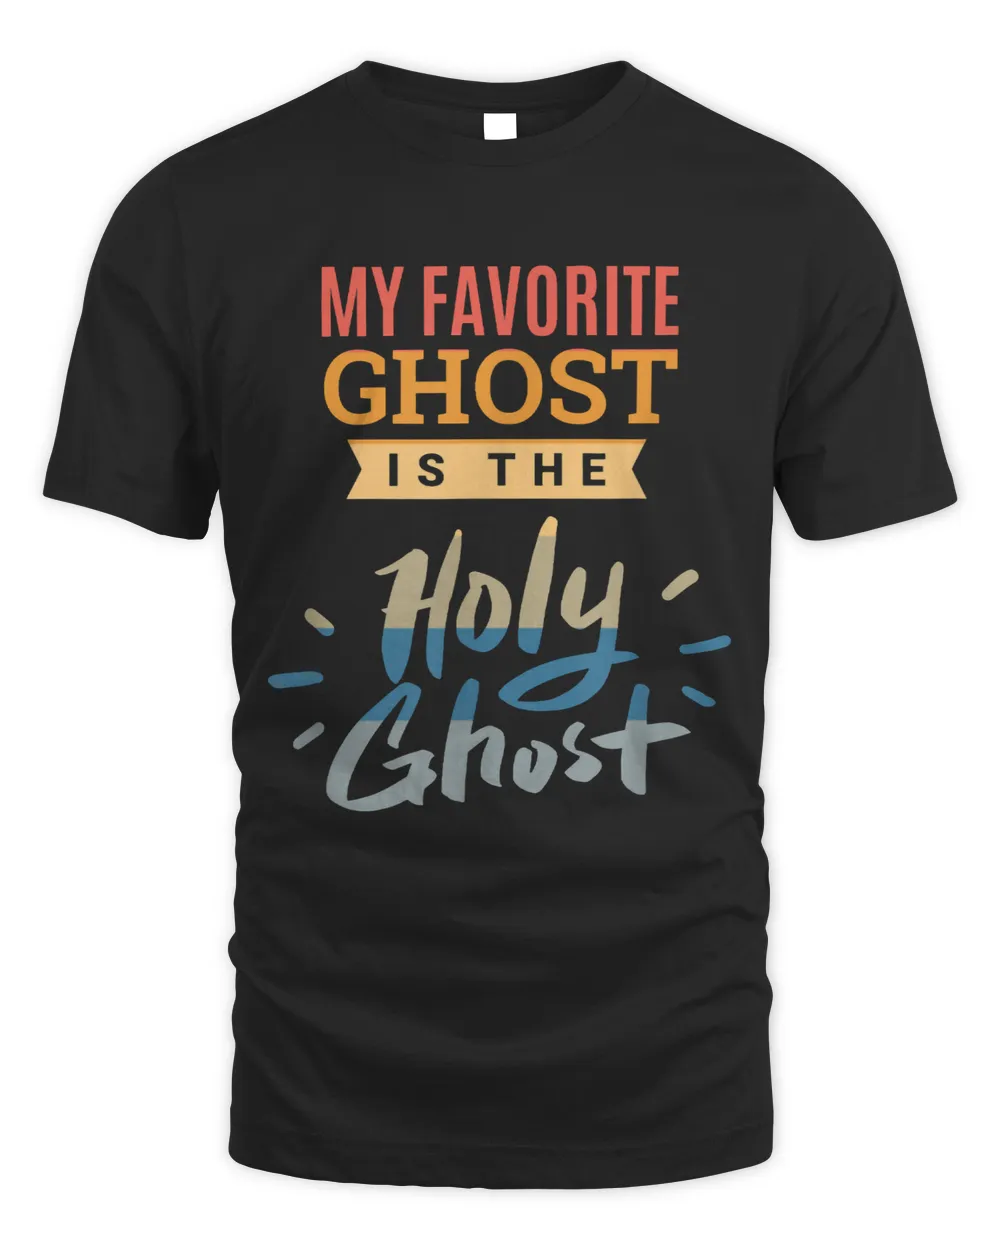 My favorite ghost is the Holy Ghost Christian Halloween